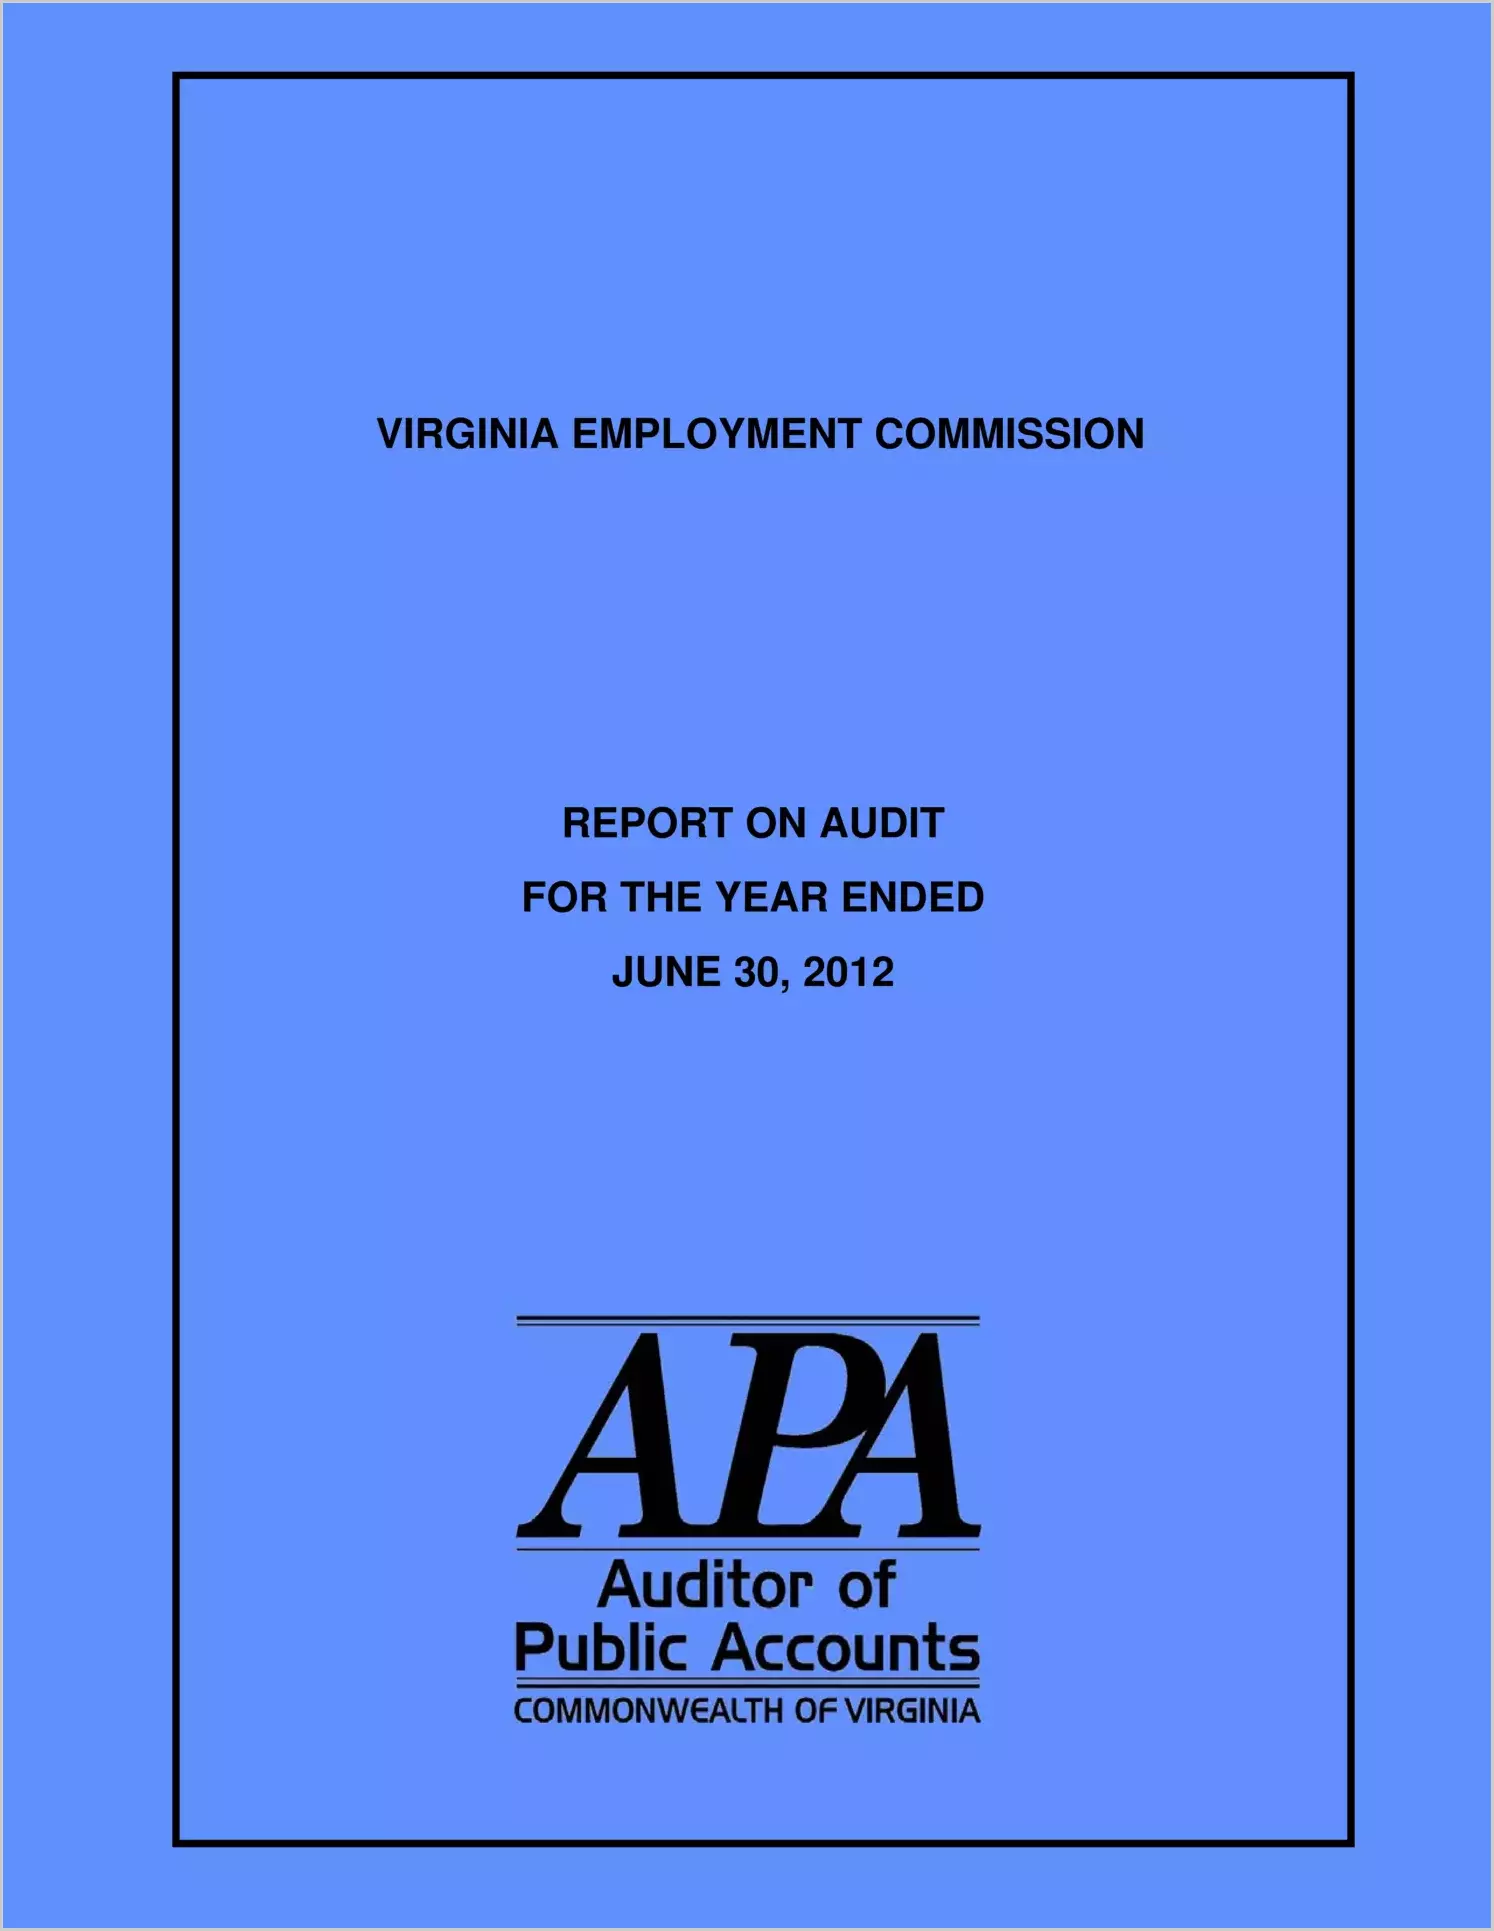 Virginia Employment Commission for the year ended June 30, 2012